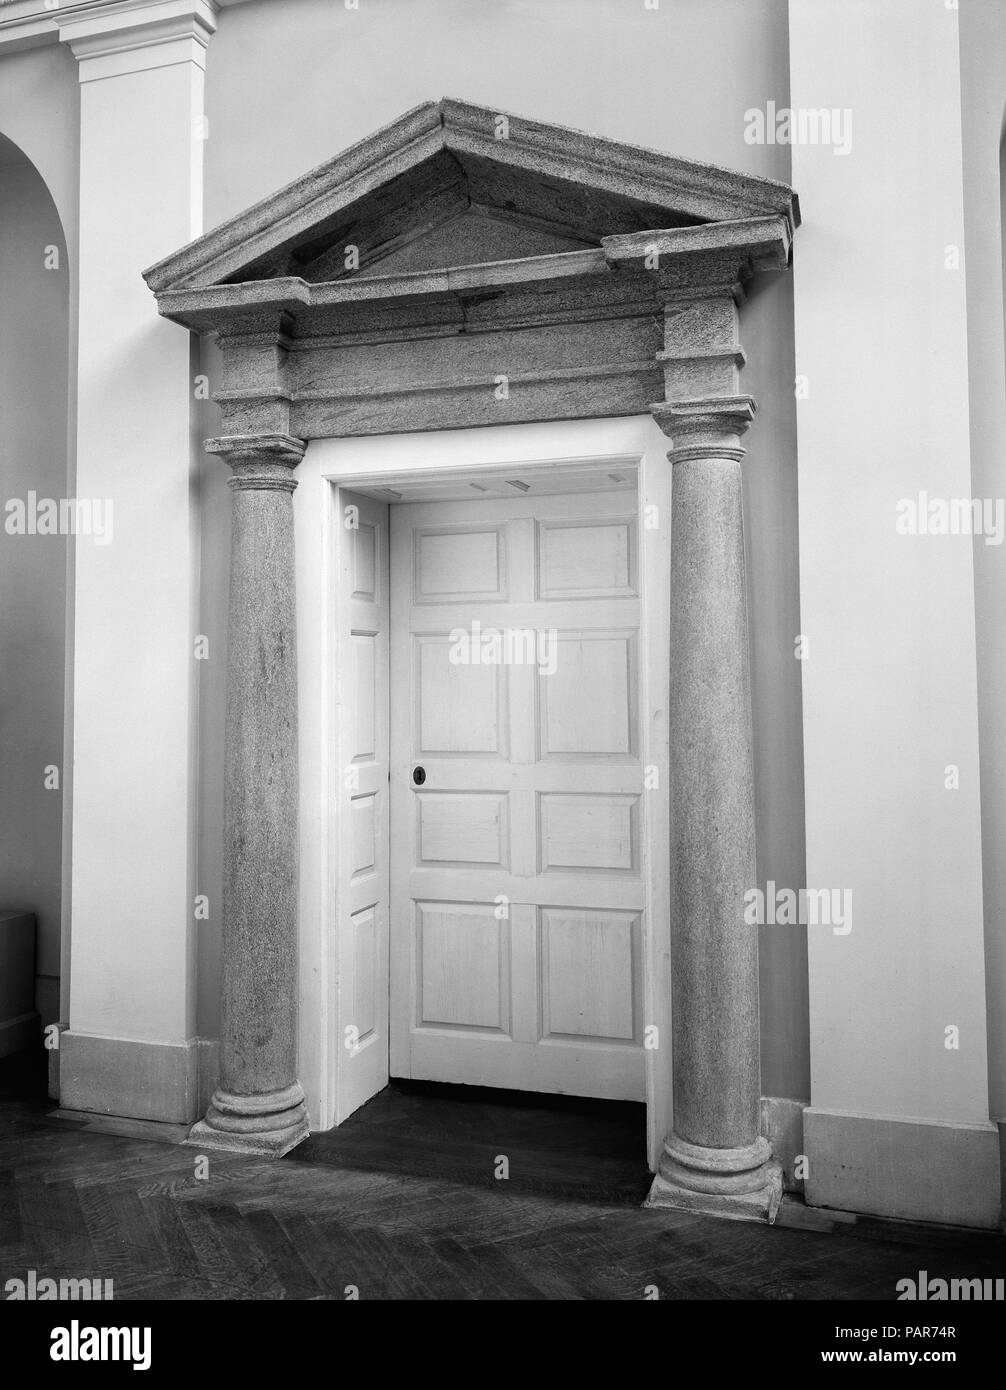 Doorway from Chalkley Hall, Frankford, Pennsylvania. Culture: American. Dimensions: Door: 96 x 47 in. (243.8 x 119.4 cm)  Portal: 146 x 84 in. (370.8 x 213.4 cm). Date: ca. 1776.  This granite and wood doorway was the former entrance to Chalkley Hall, a house formerly located at Frankford, Pennsylvania, near Philadelphia. The main portion of the house, including the doorway, was erected in about 1776 for Abel James, a Philadelphia merchant. It was attached to a smaller, lower wing built in 1723 by Thomas Chalkley, merchant, ship owner, and Quaker missionary, whose daughter married Abel James.  Stock Photo